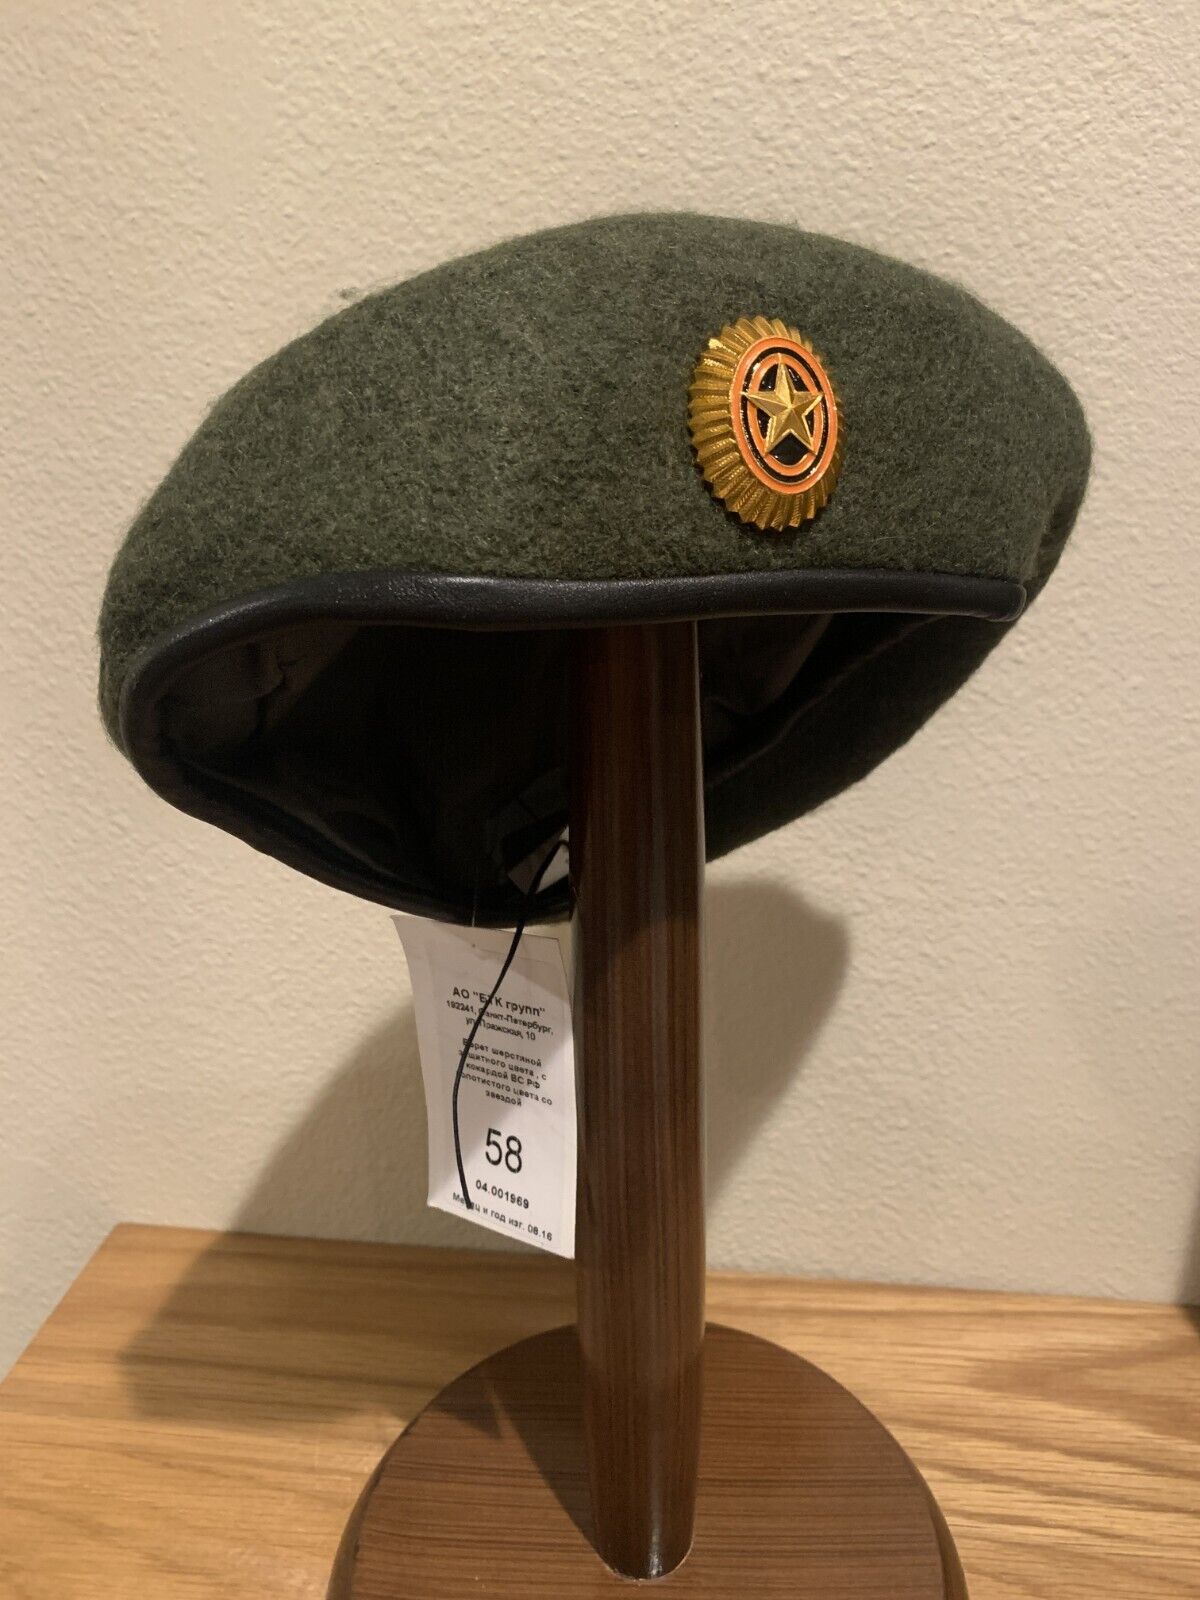 Russian Army Modern Unissued Wool Olive Beret w/ Cockade 2016 Dated Size 58